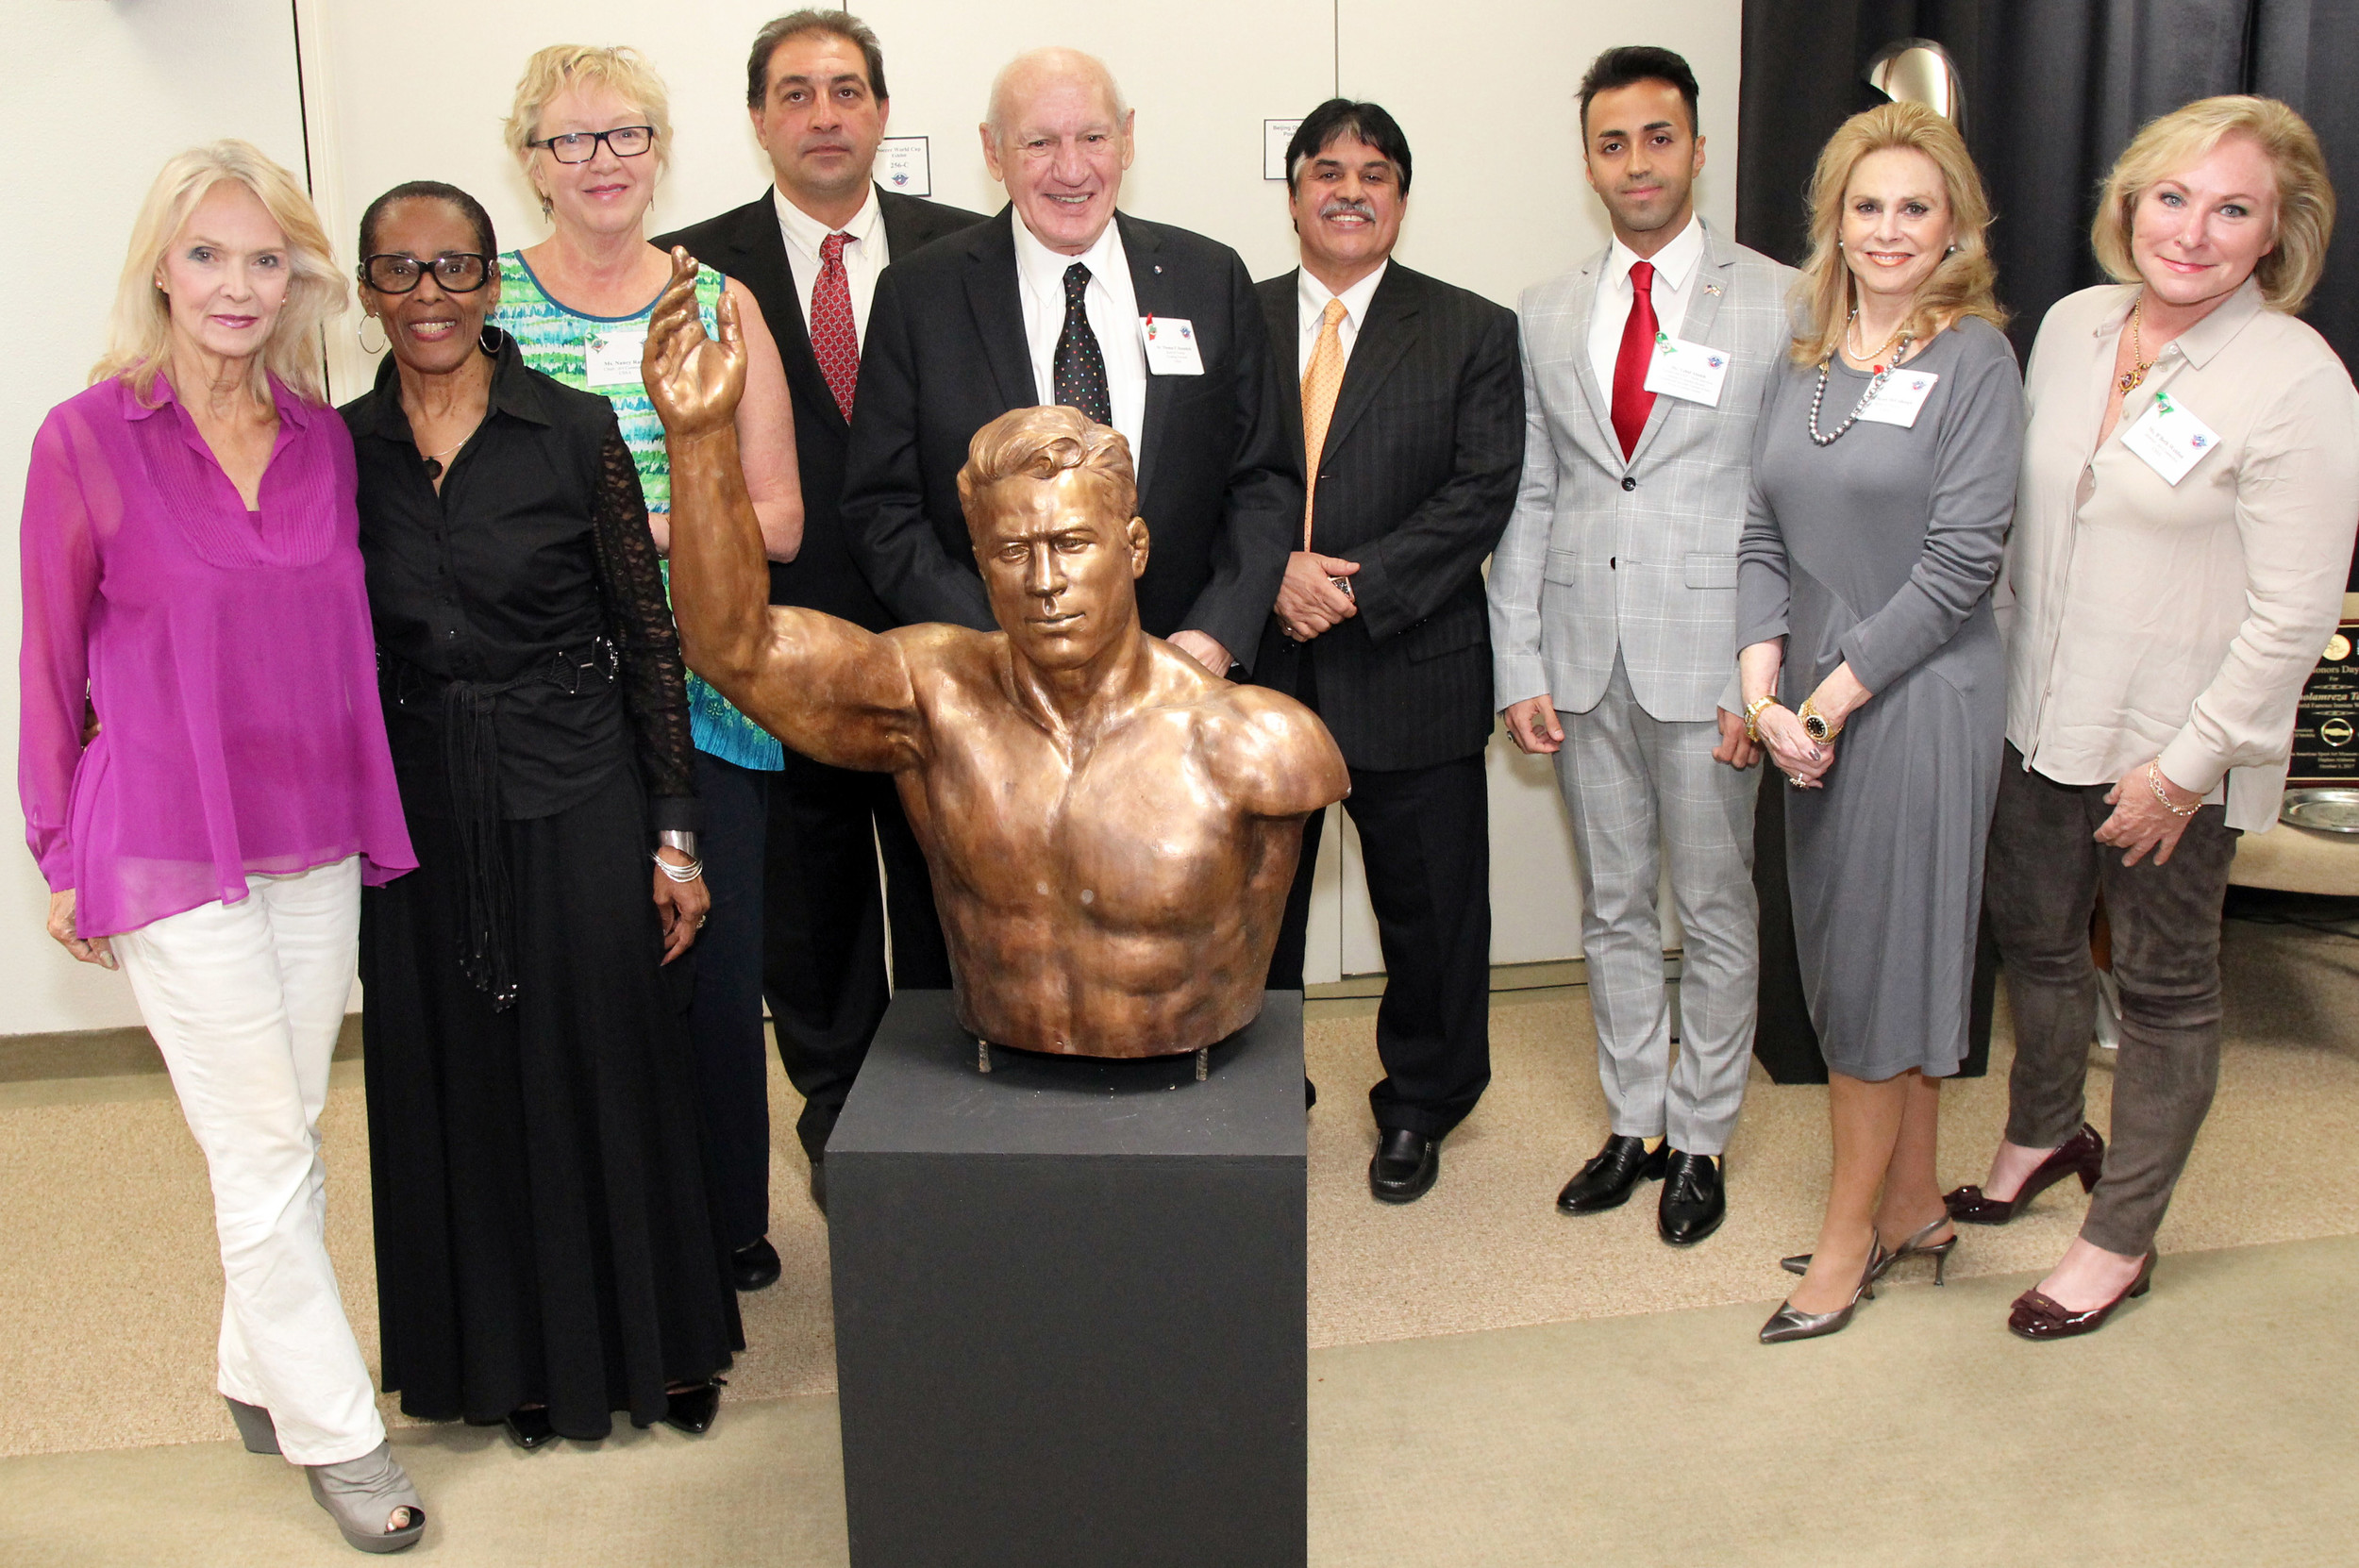 From left are United States Sports Academy’s Art Committee members Kay Daughdrill; B.J. Cooper; and chair Nancy Raia; Babak Takhti, son of the late Jahan Pahlavan Takhti; Academy Founding President and committee member Dr. Thomas P. Rosandich; Ebrahim Maghsoud, NAIFS President and President of the Hafez Corp. in Mobile; Vahid Abideh, NAIFS Founder and CEO and Secretary General of Iran’s Young Journalists Society; committee member emerita and Academy Trustee Susan McCollough; and committee member B’Beth Weldon with sculpture of legendary Iranian wrestler Jahan Pahlavan Takhti presented to the American Sport Art Museum & Archives (ASAMA) by the North American Iranian Friendship Society (NAIFS).